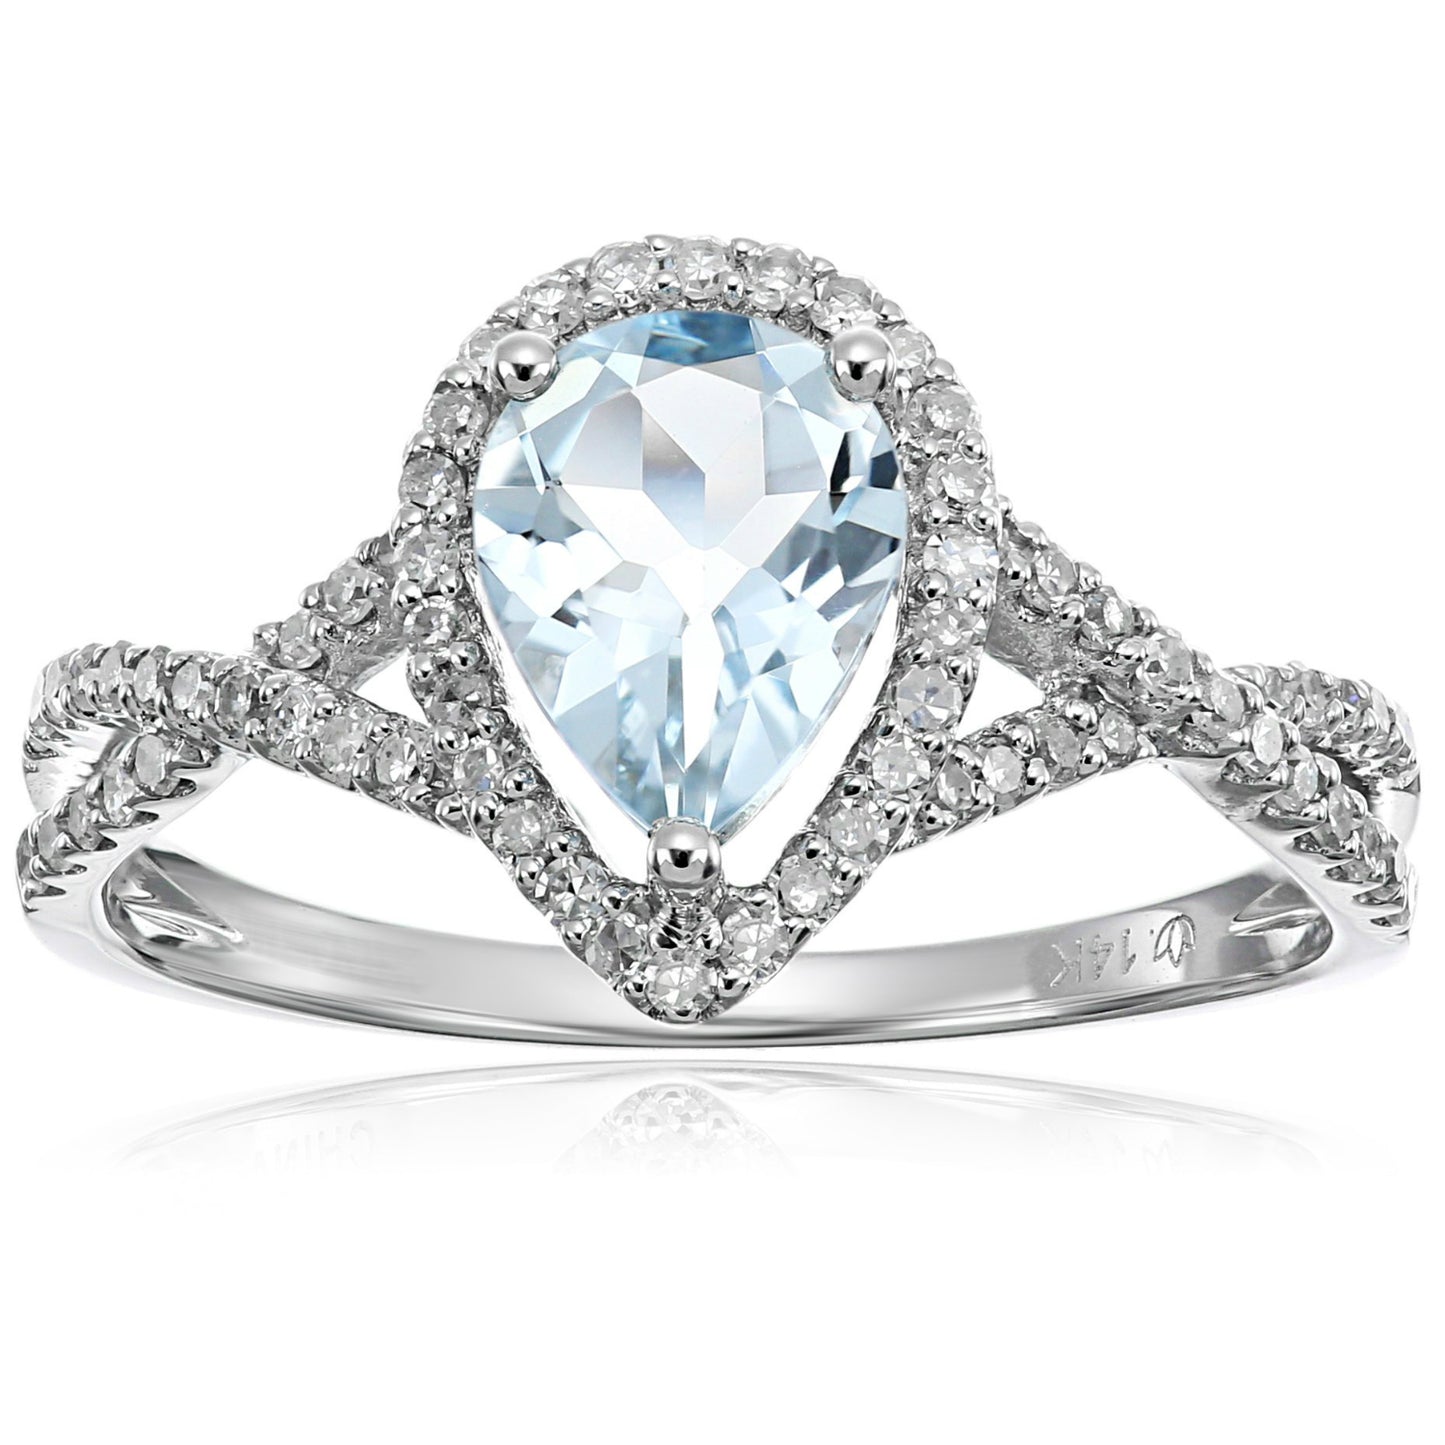 14k White Gold Aquamarine and Diamond Solitaire Infinity Shank Engagement Ring (1/4cttw, H-I Color, I1-I2 Clarity), - pinctore